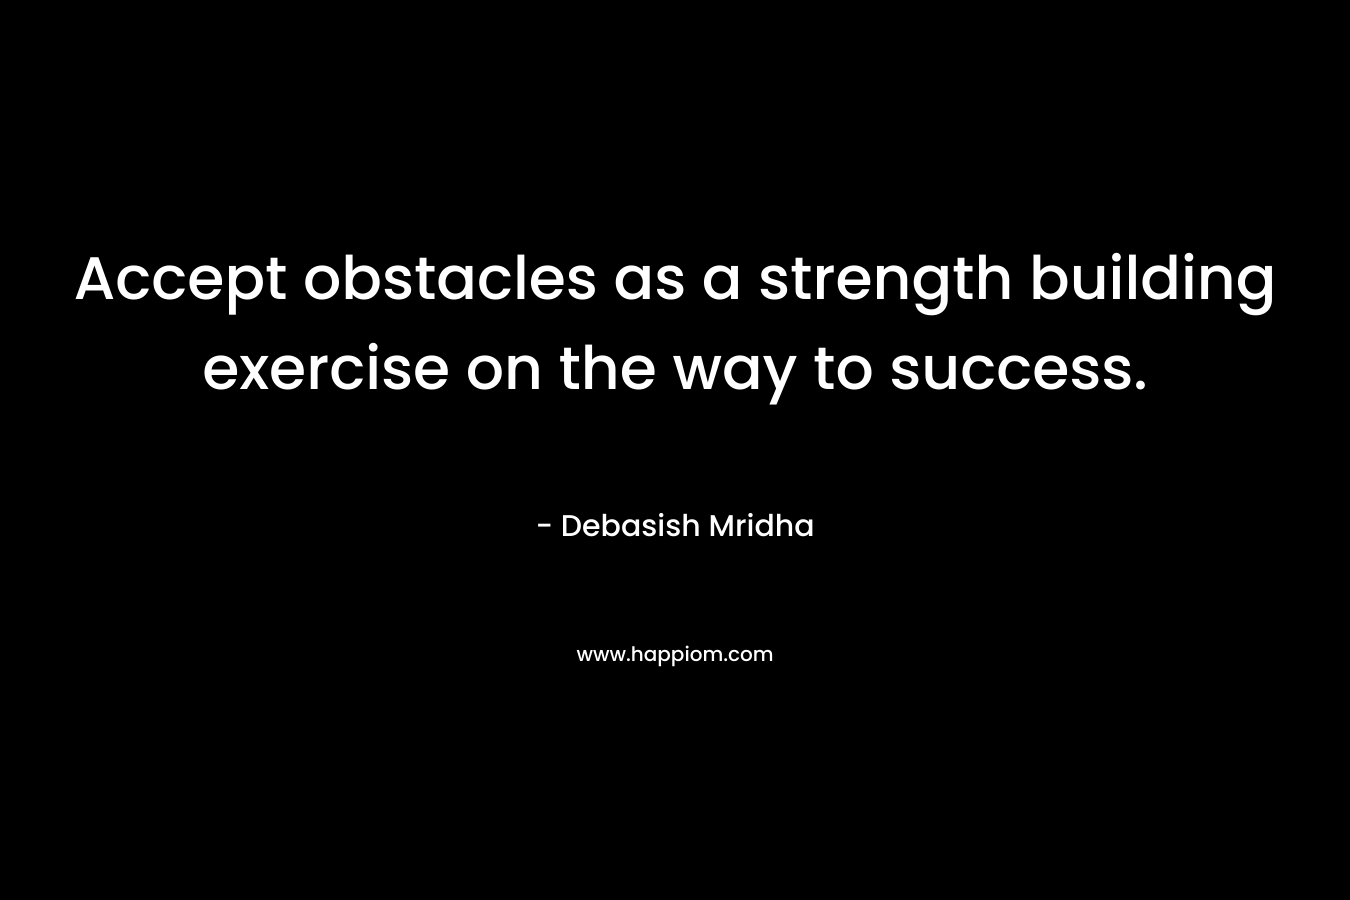 Accept obstacles as a strength building exercise on the way to success.